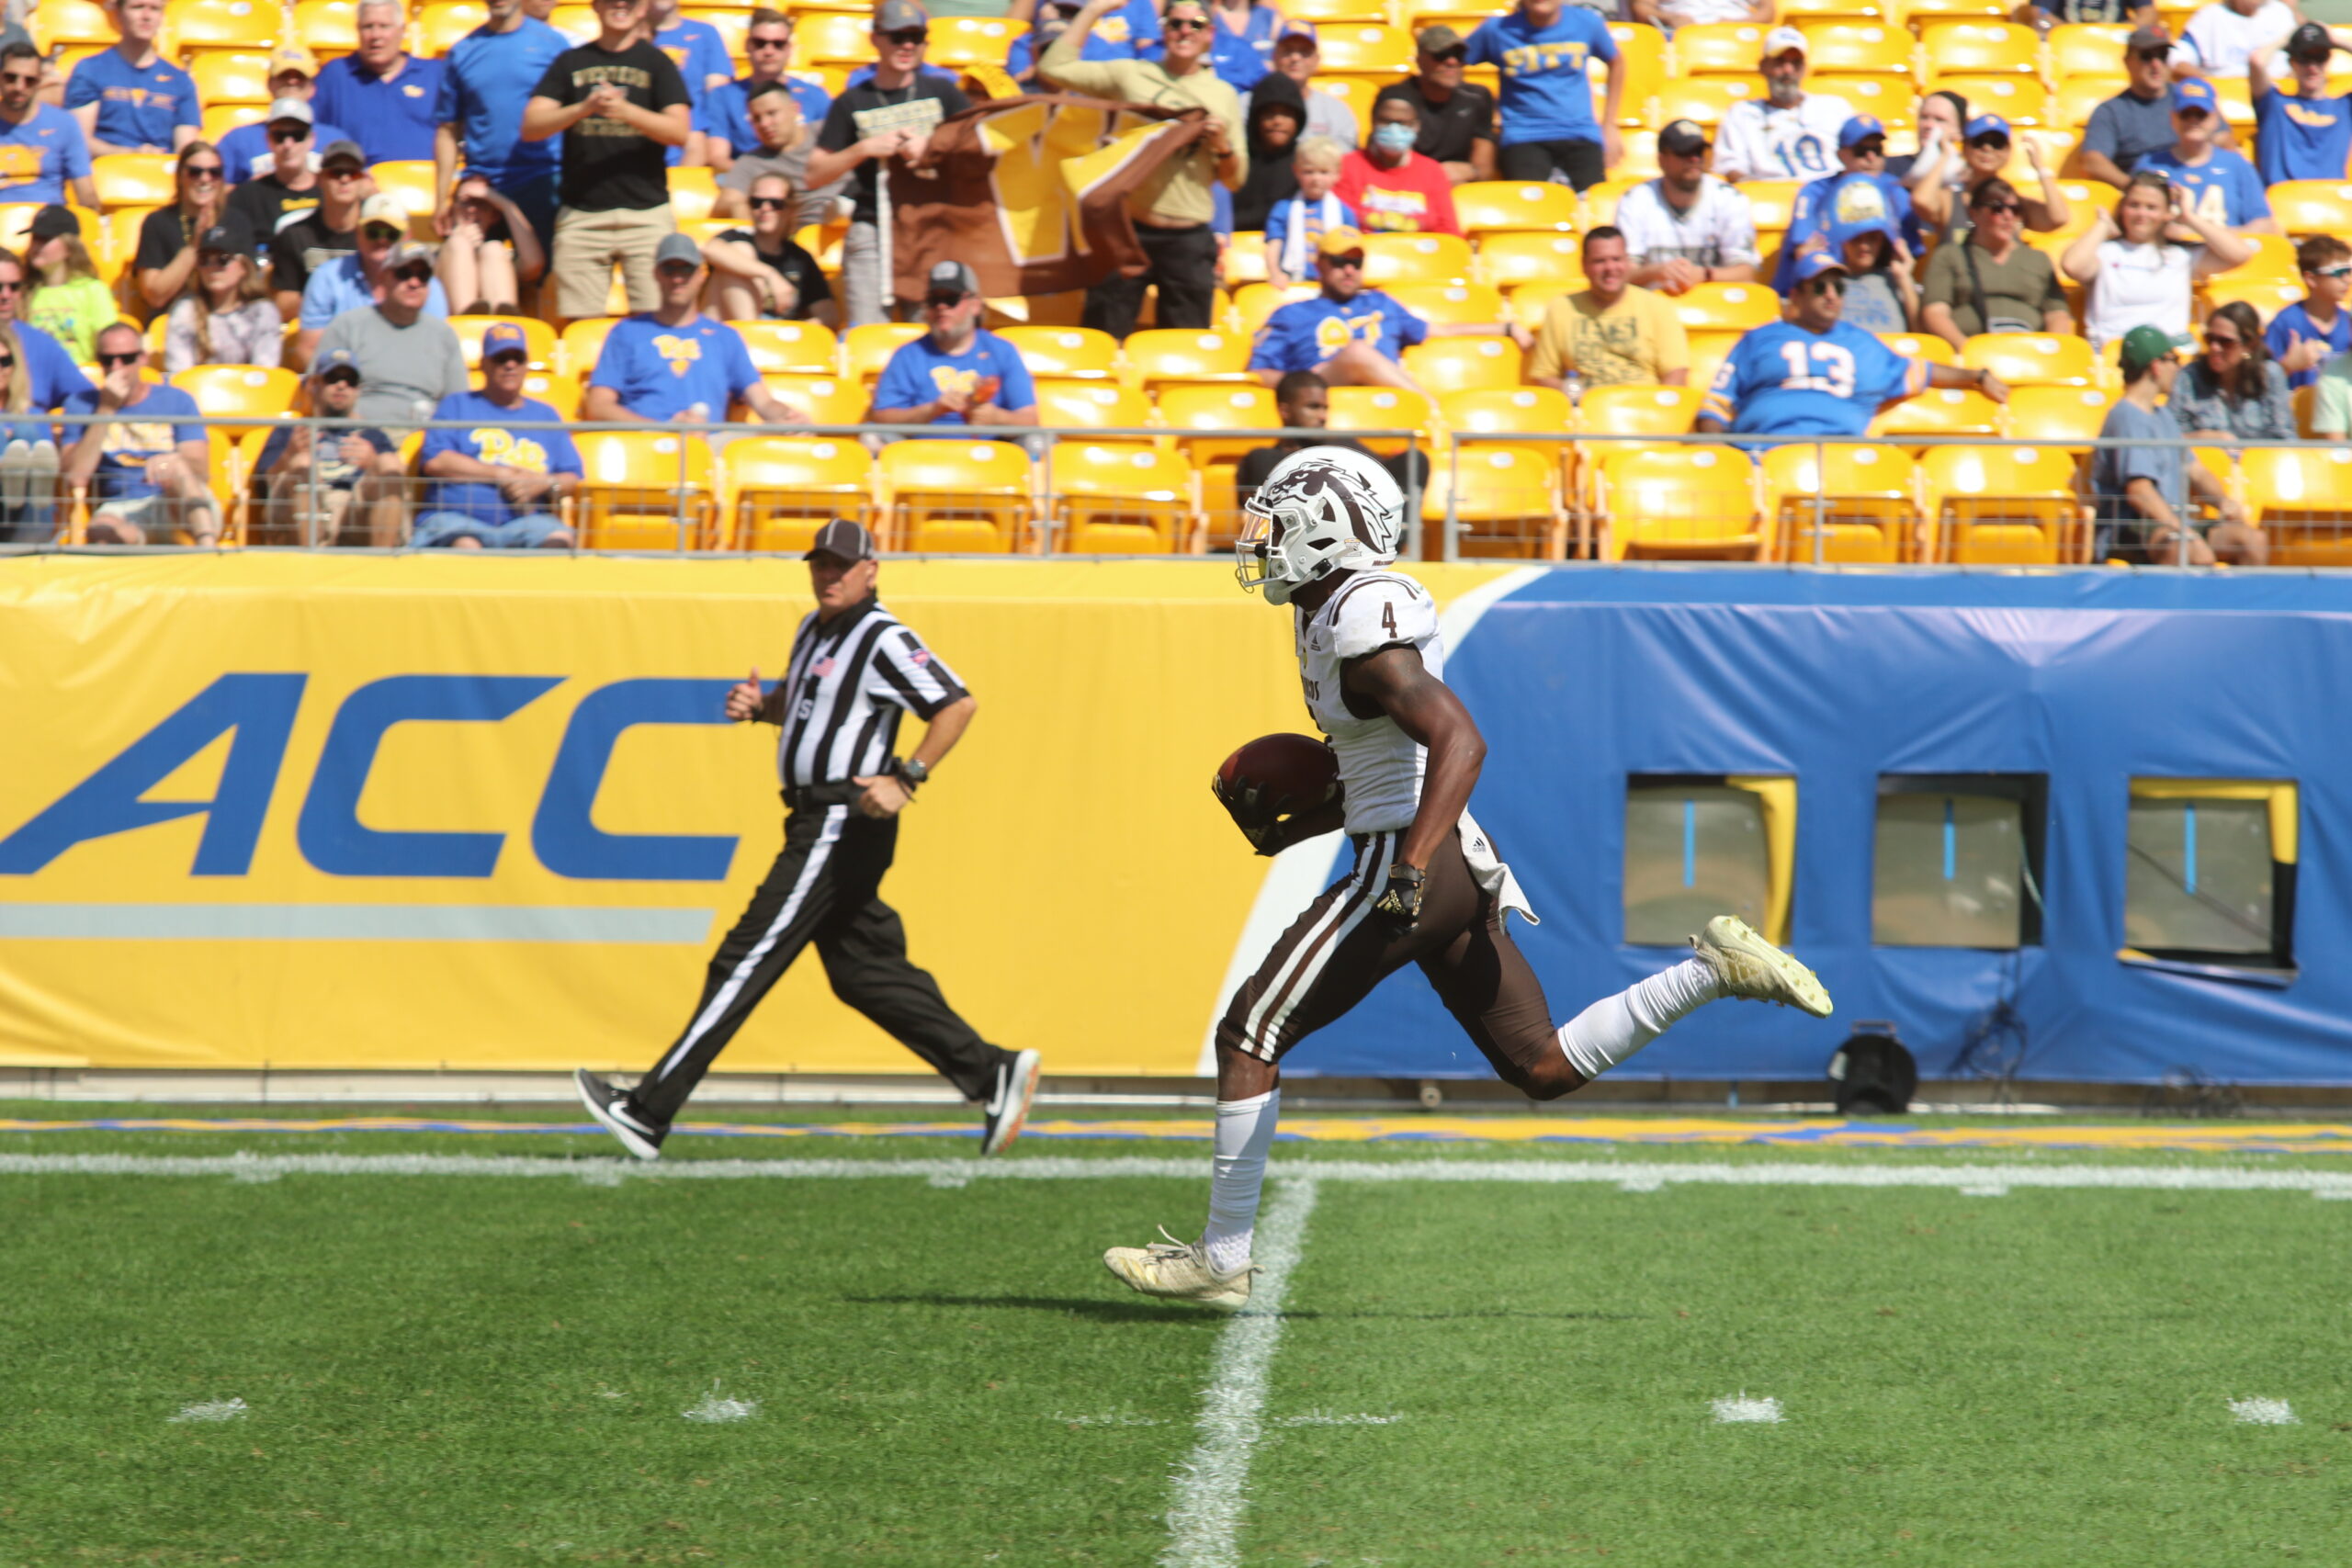 Western Michigan Receiver Corey Crooms who amassed 161 yards receiving as part of the Broncos air attack against the Panthers defense ( Photo Credit : Vince Butts- UMT Sports Heinz Field 09/18/21) 